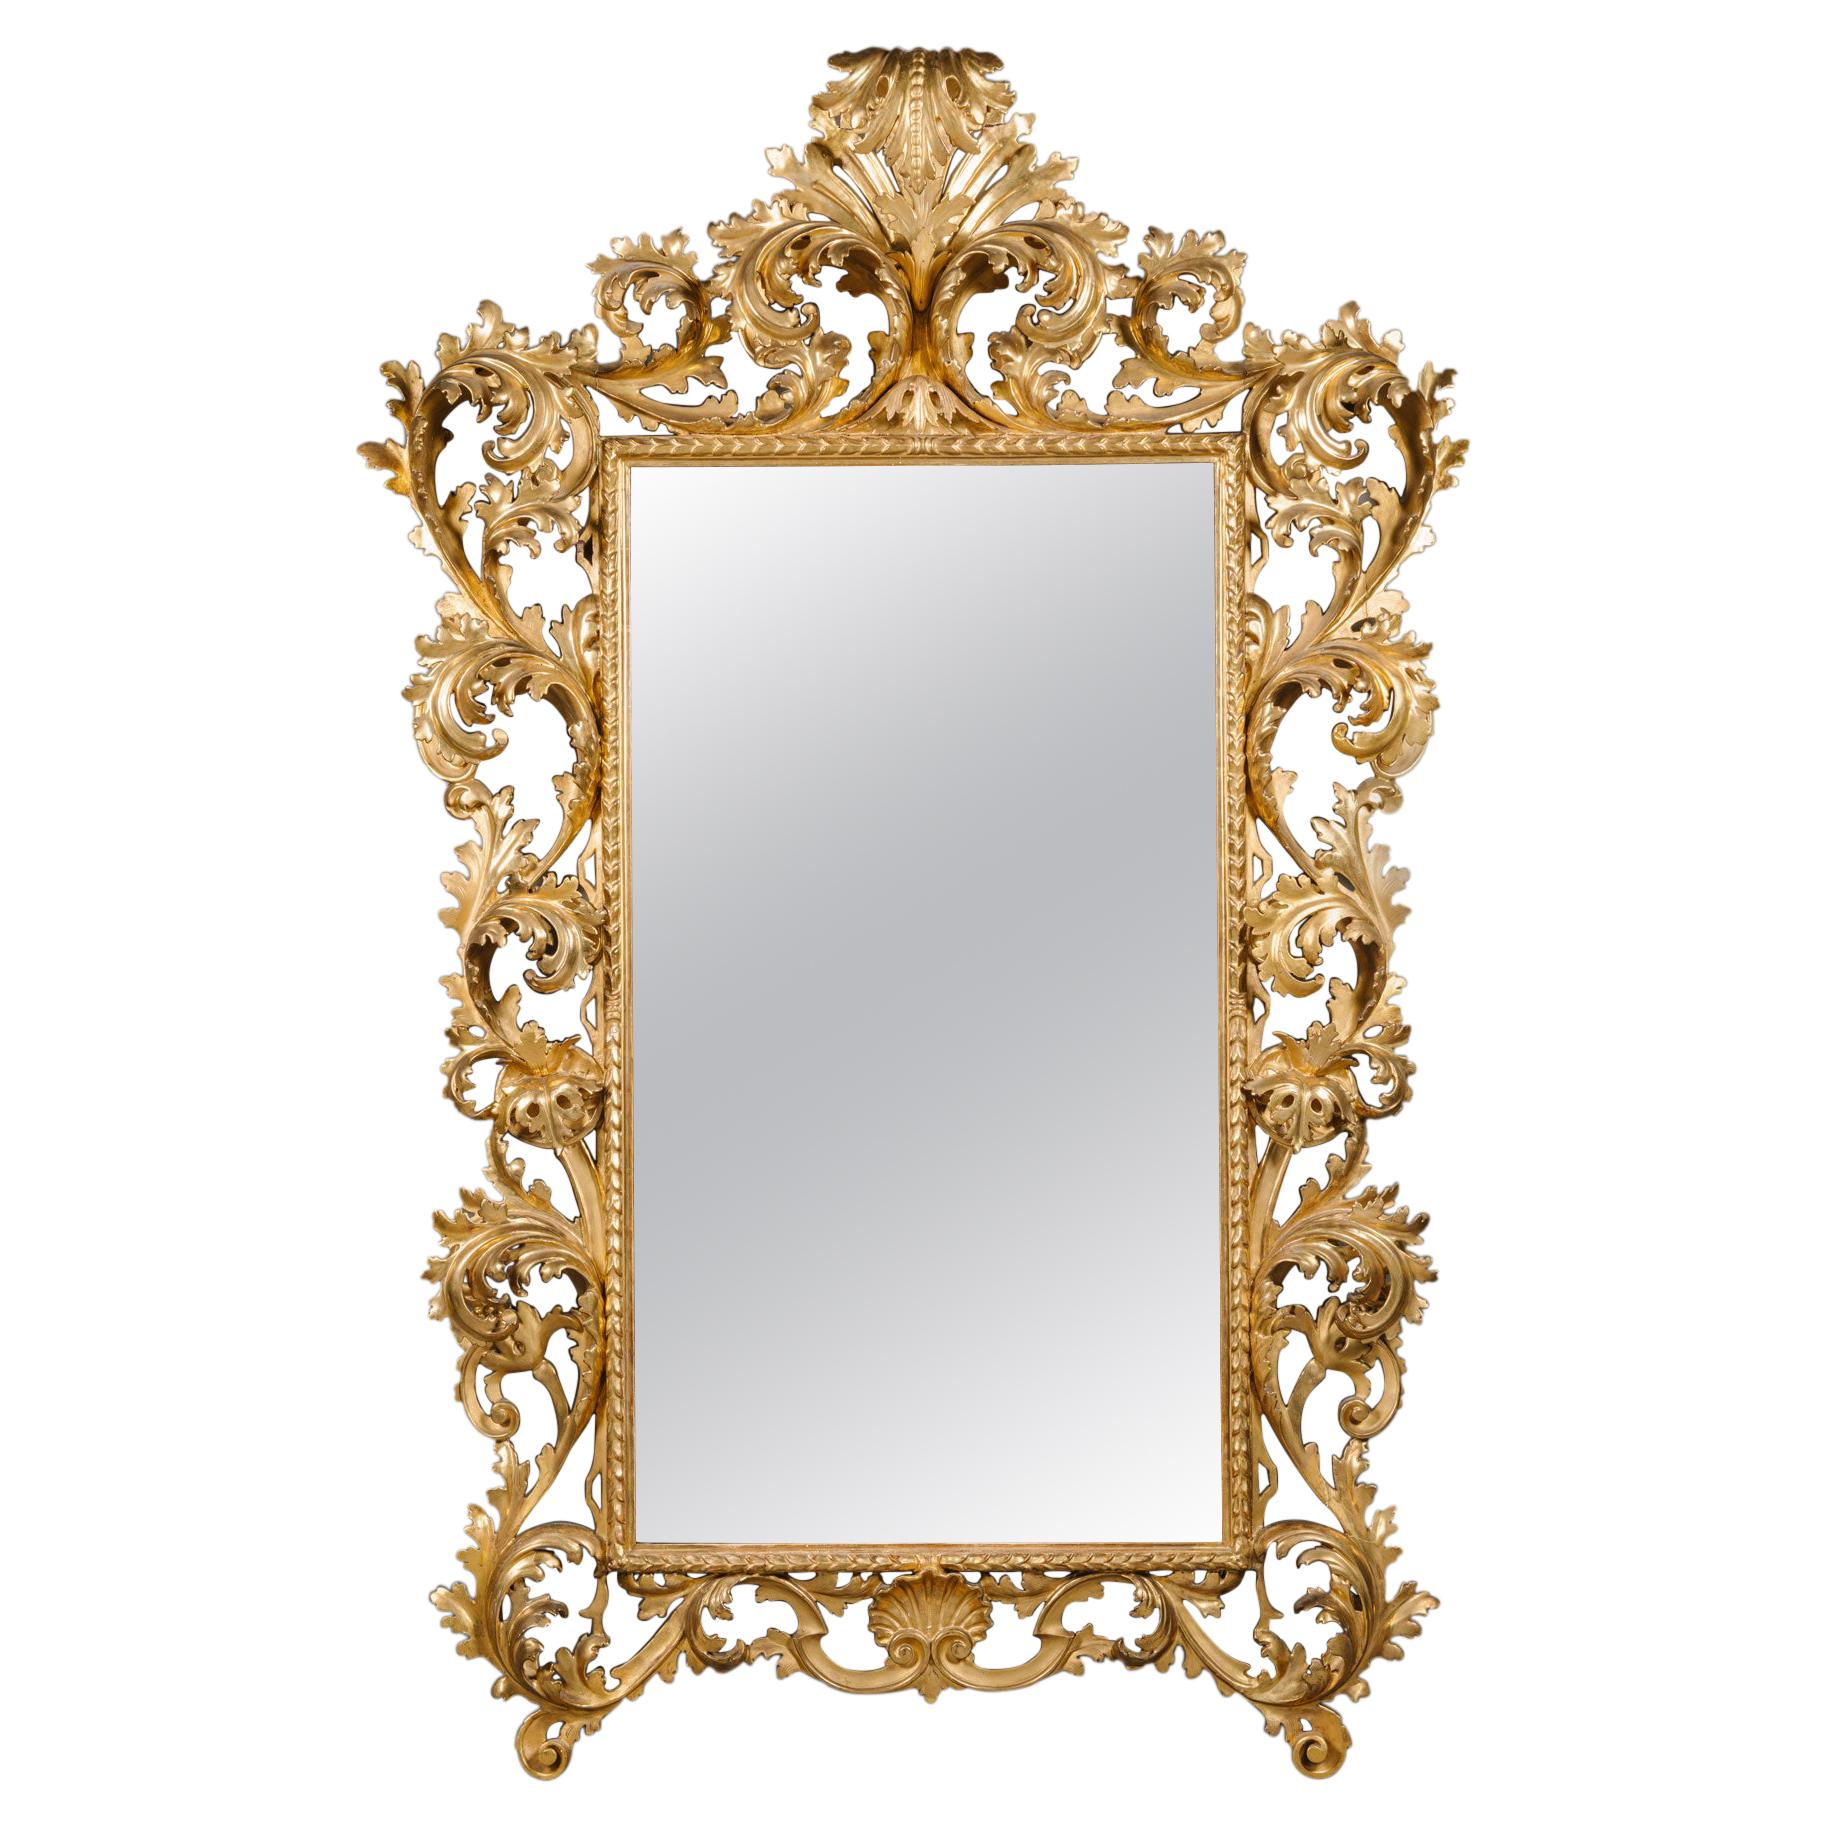 Large Florentine Giltwood Mirror in the Baroque Revival Style